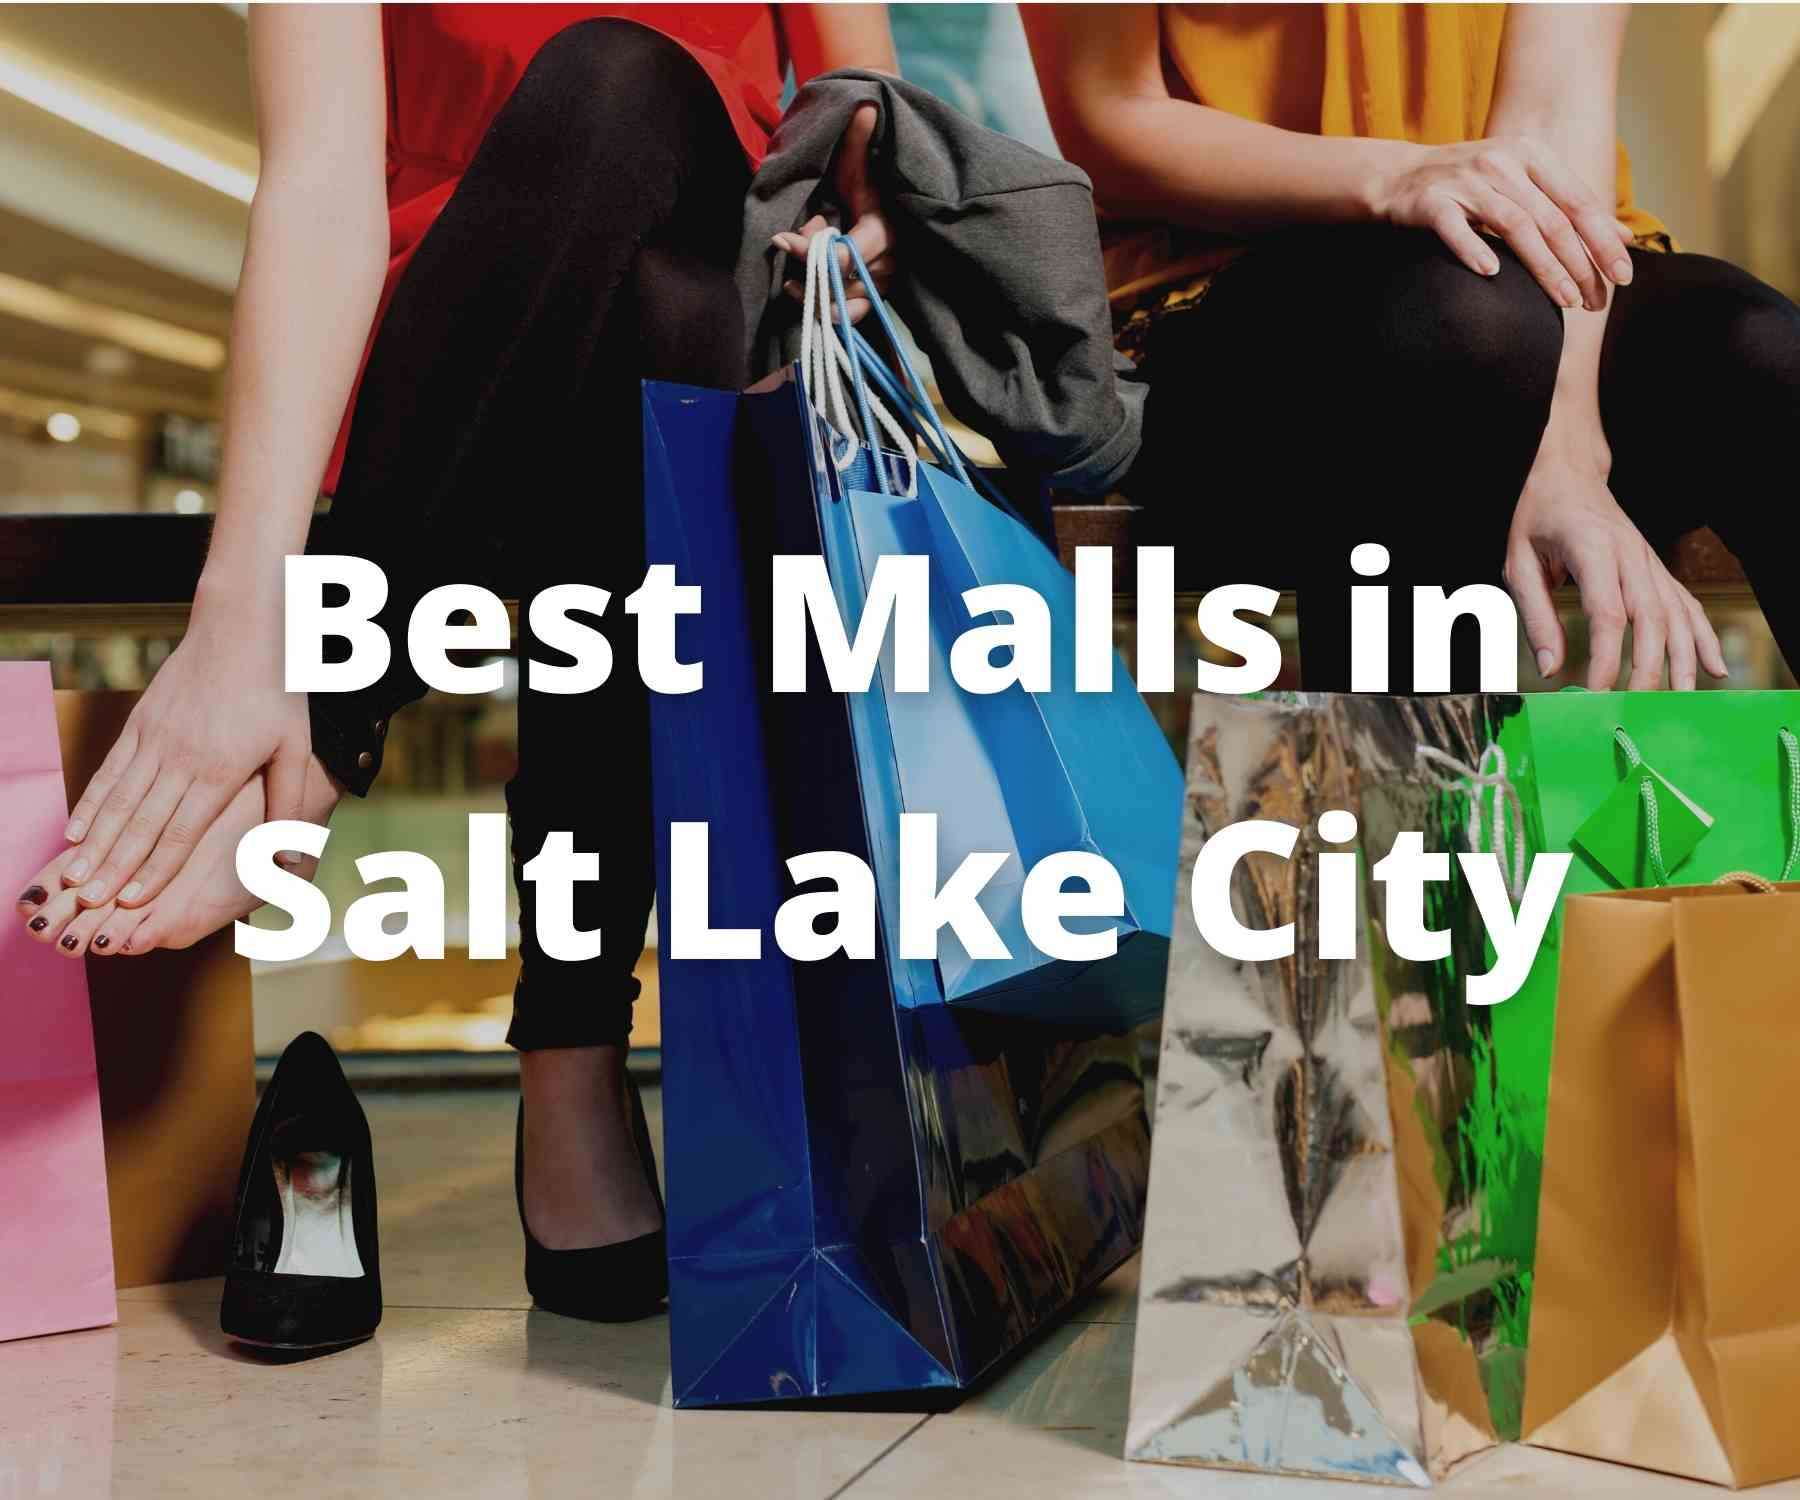 City Creek Center is one of the best places to shop in Salt Lake City